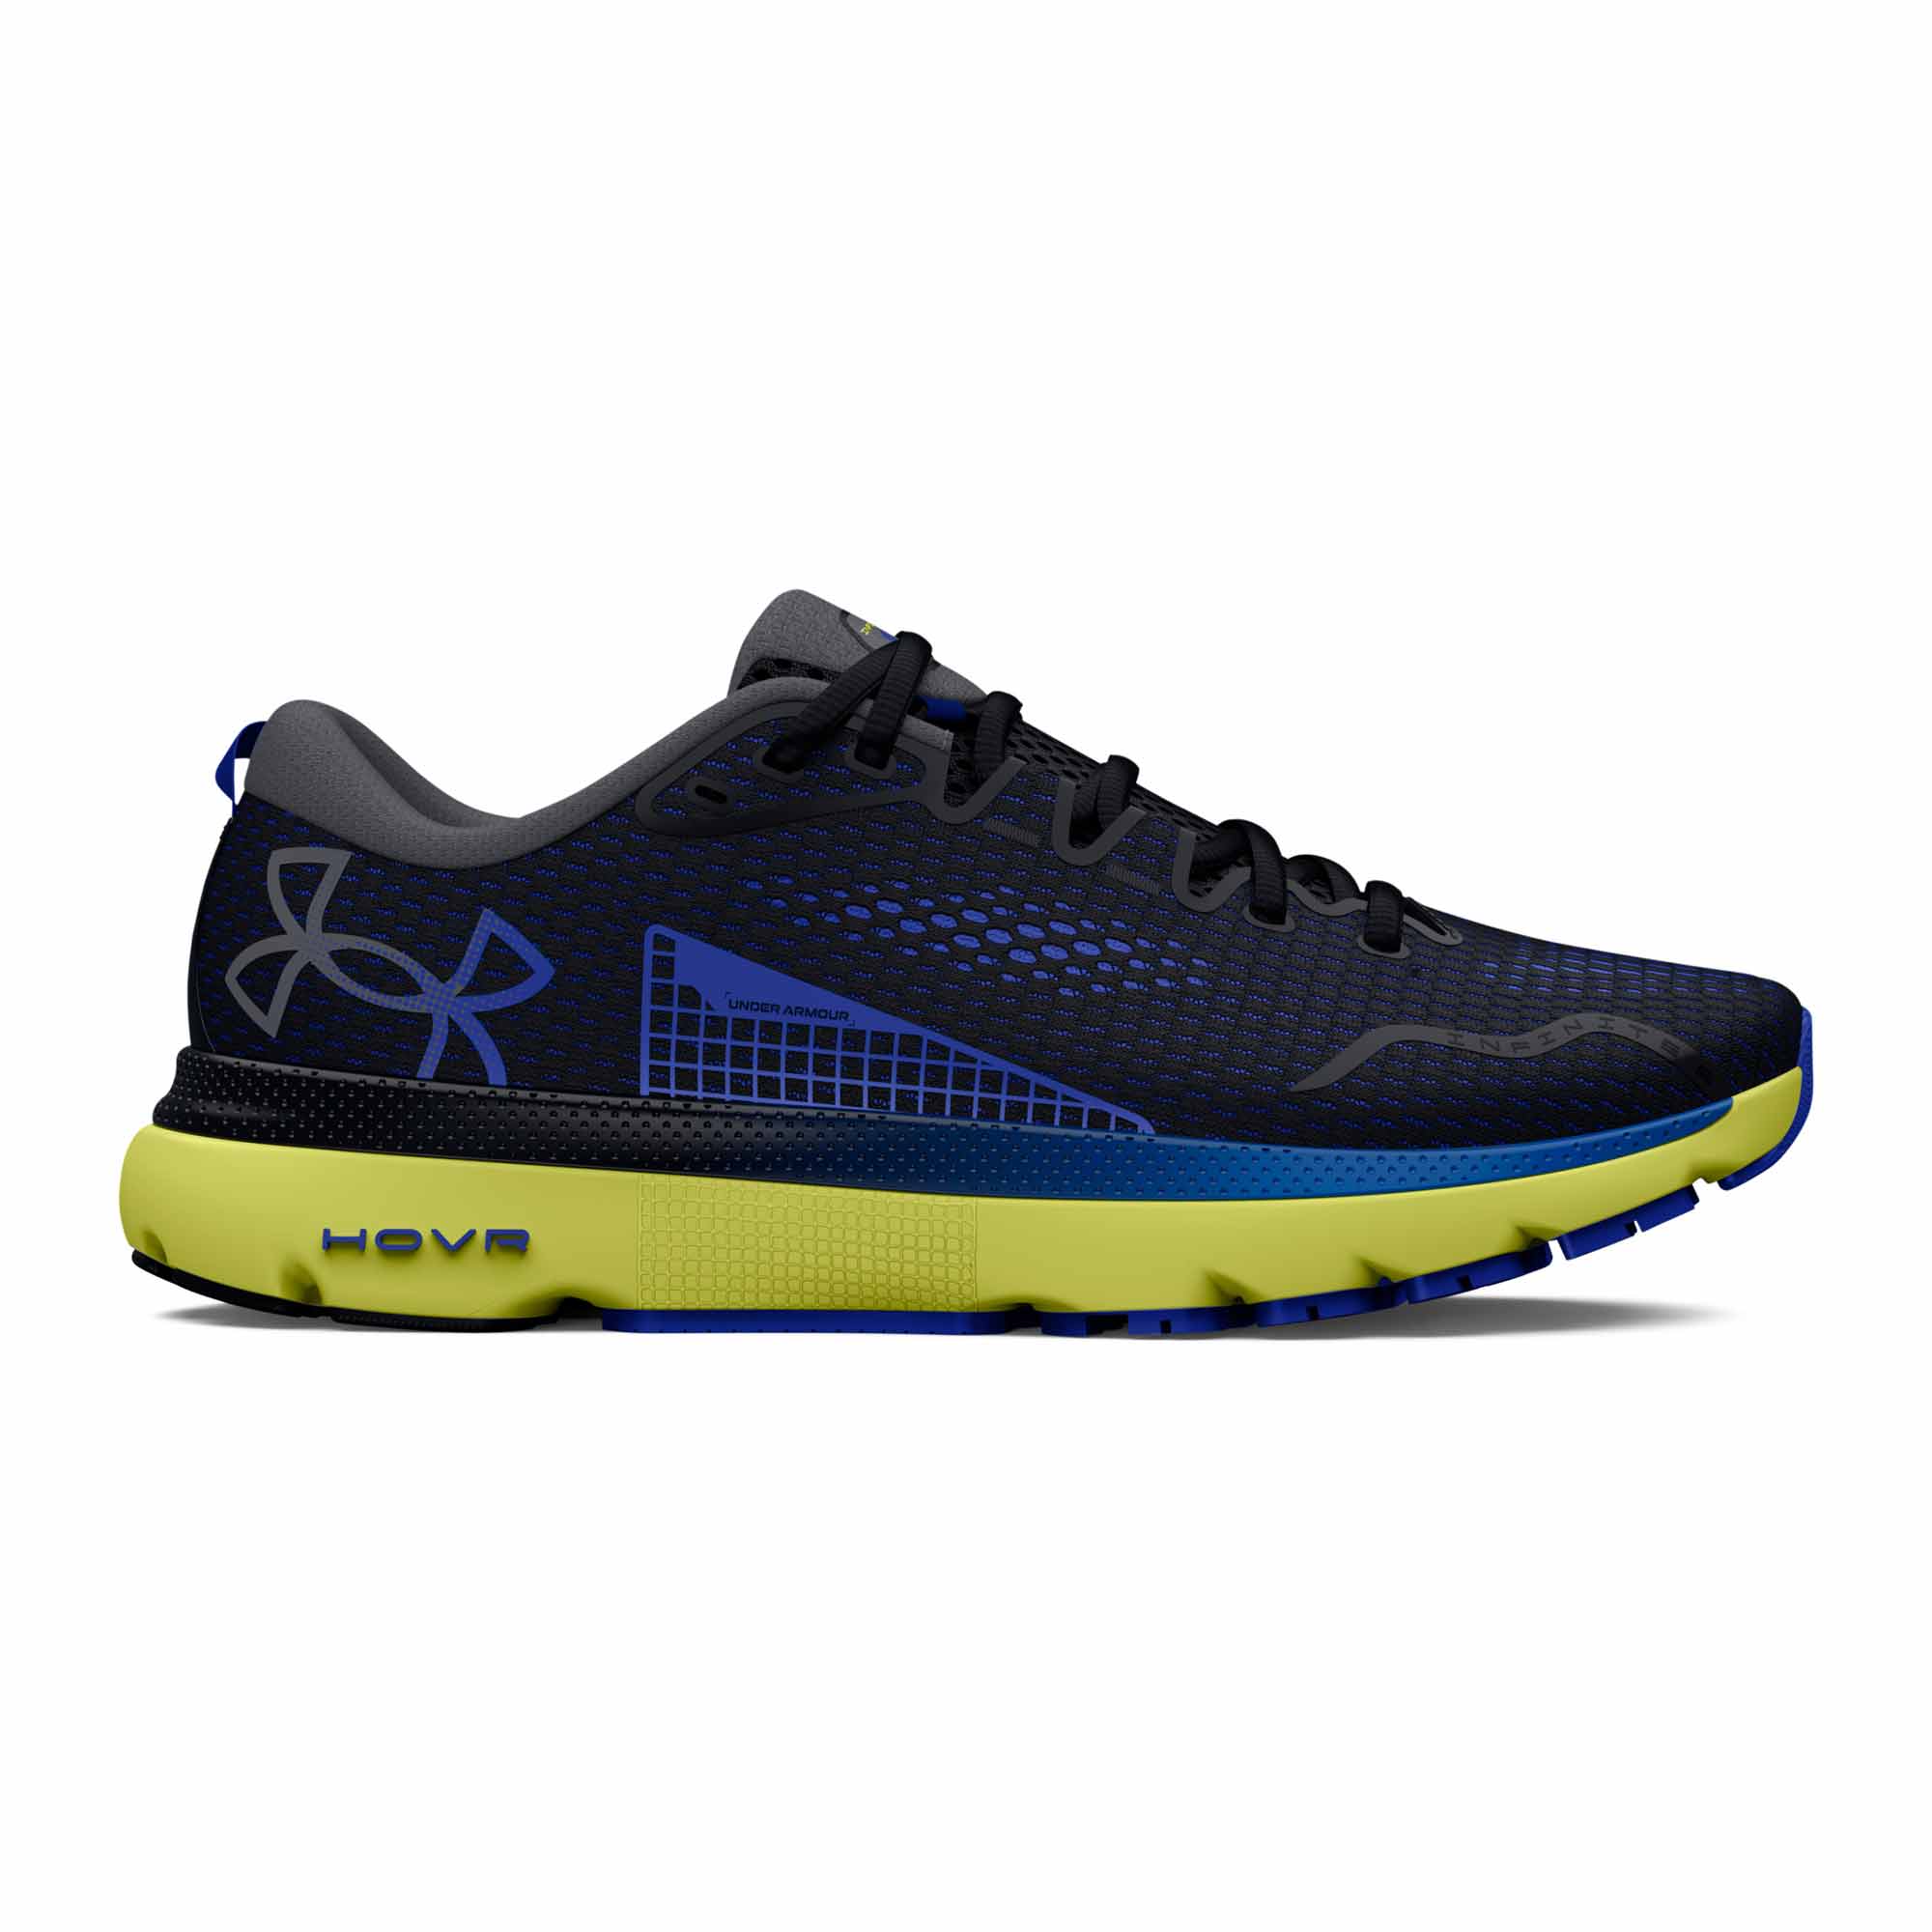 Under Armour Mens HOVR Infinite 5 Running Shoes